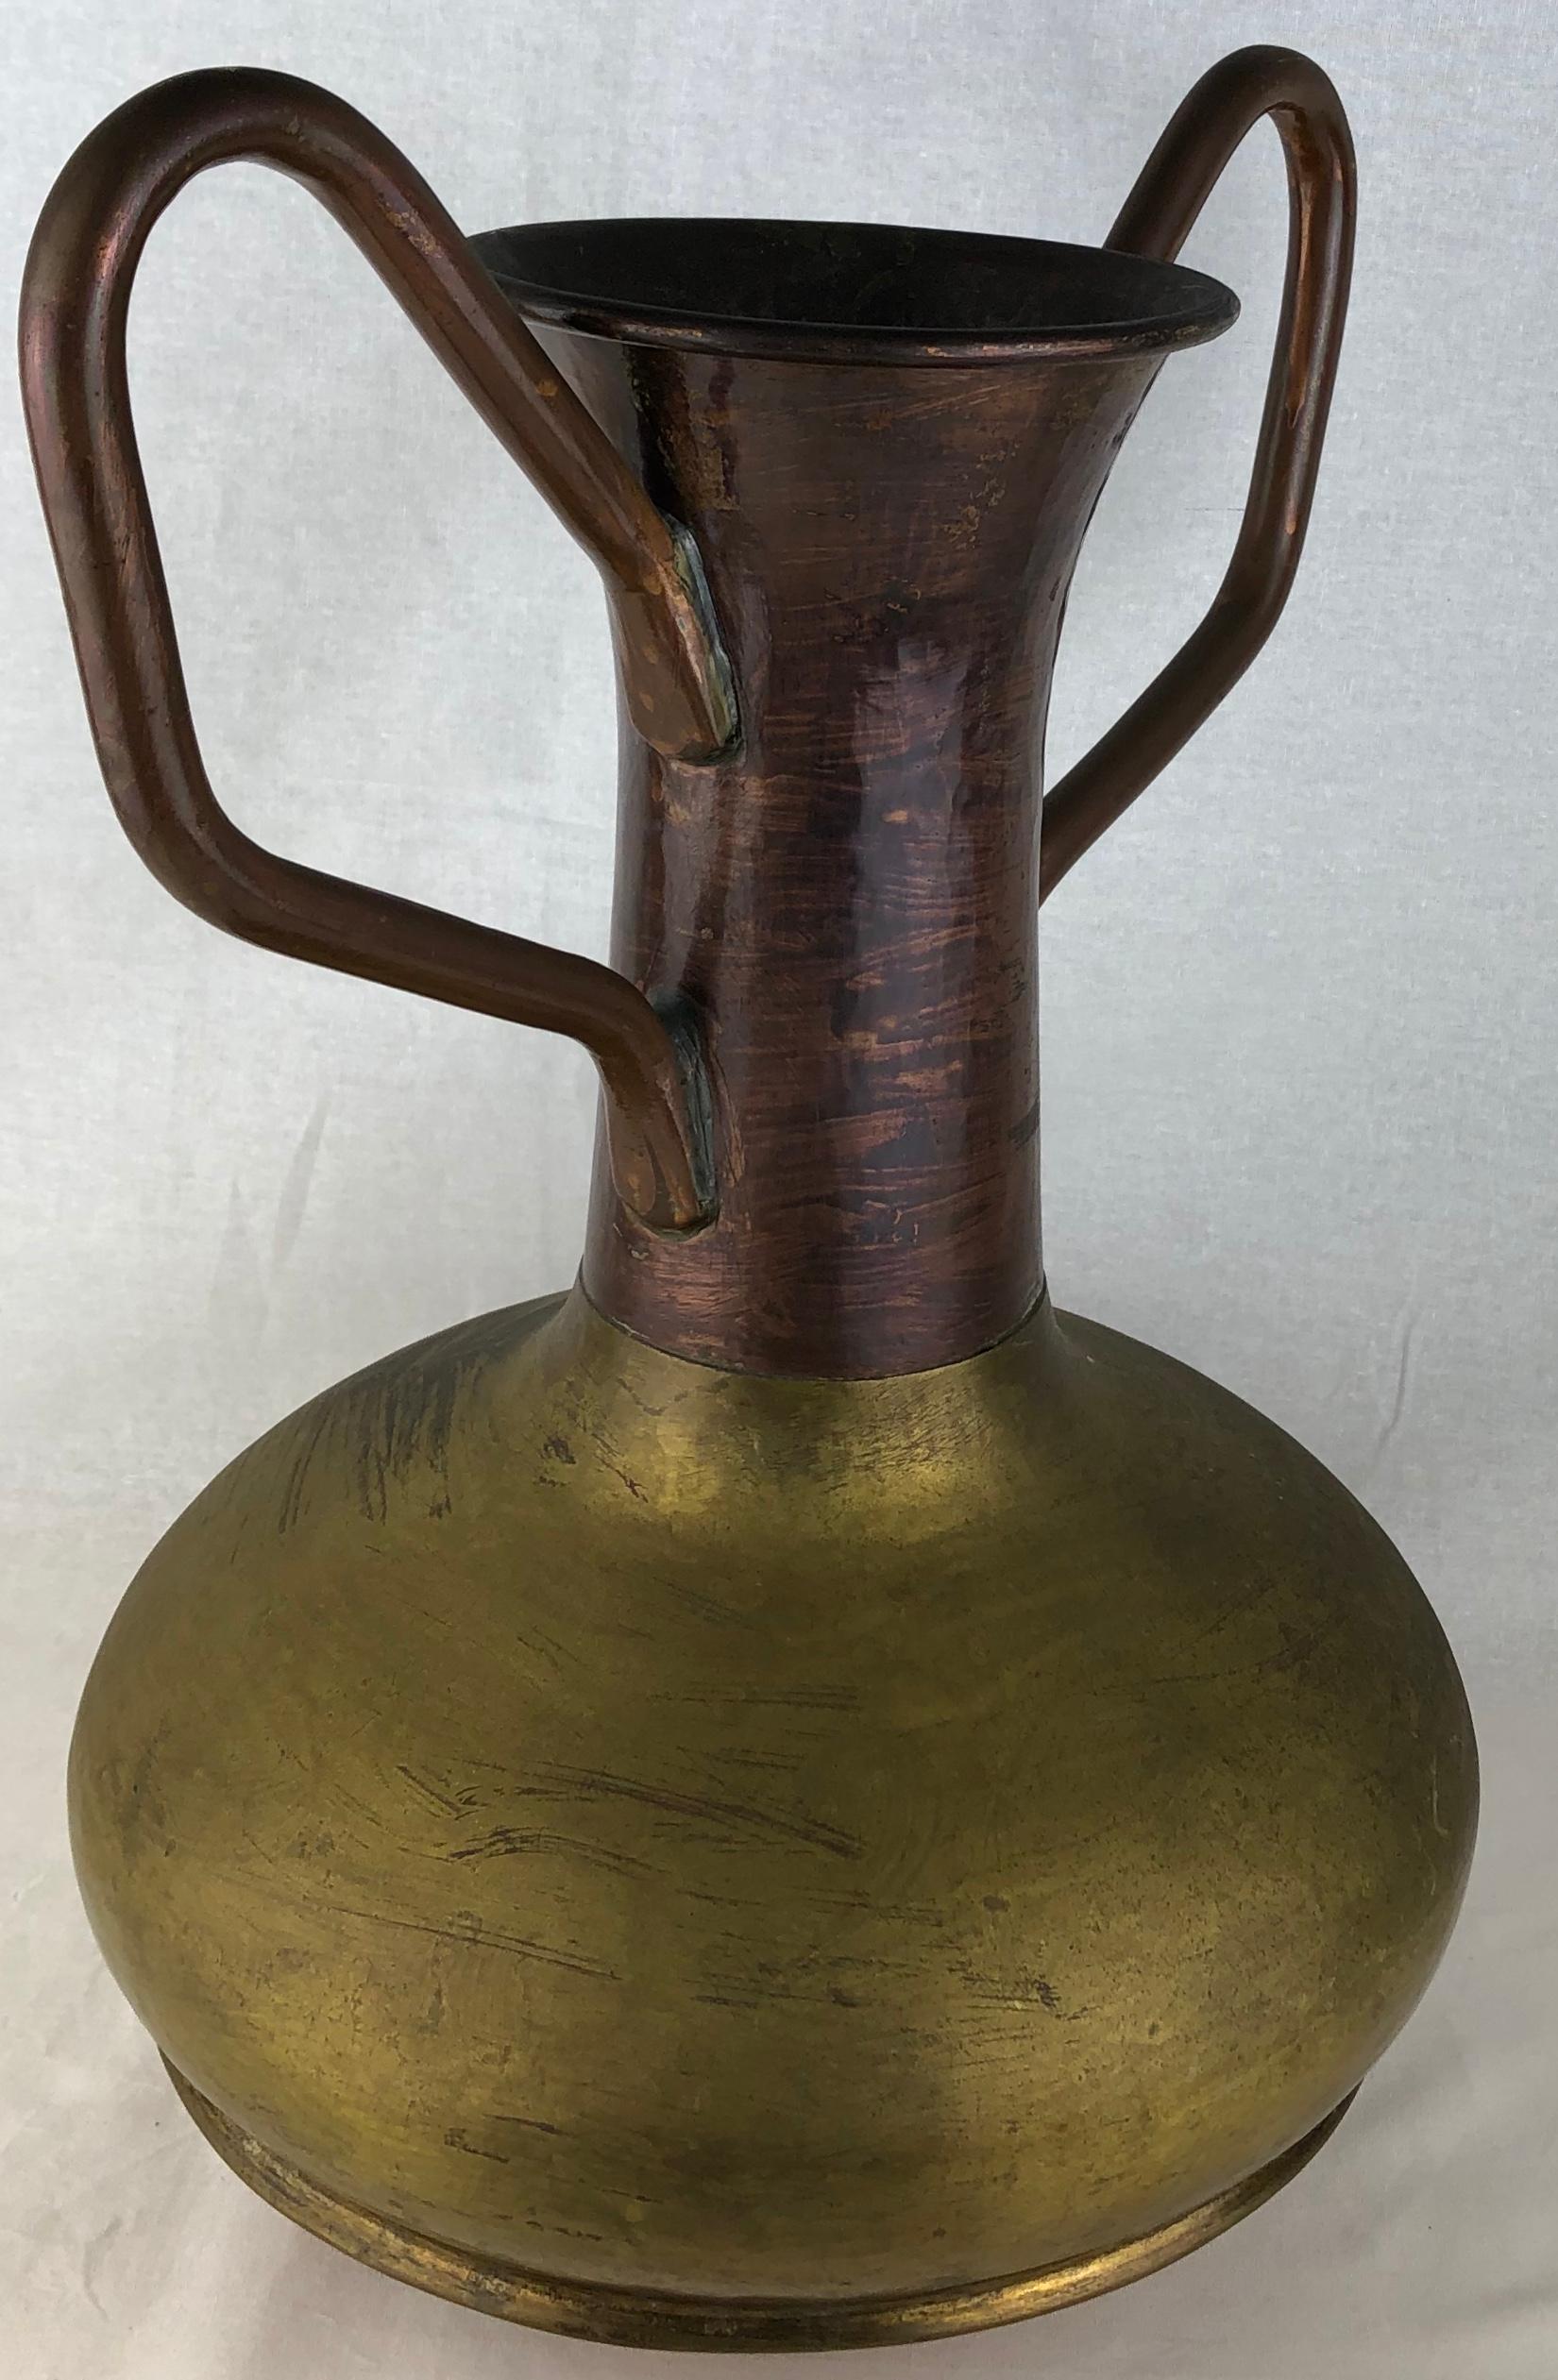 20th Century French Art Nouveau Style Copper Planter or Vase with Handles